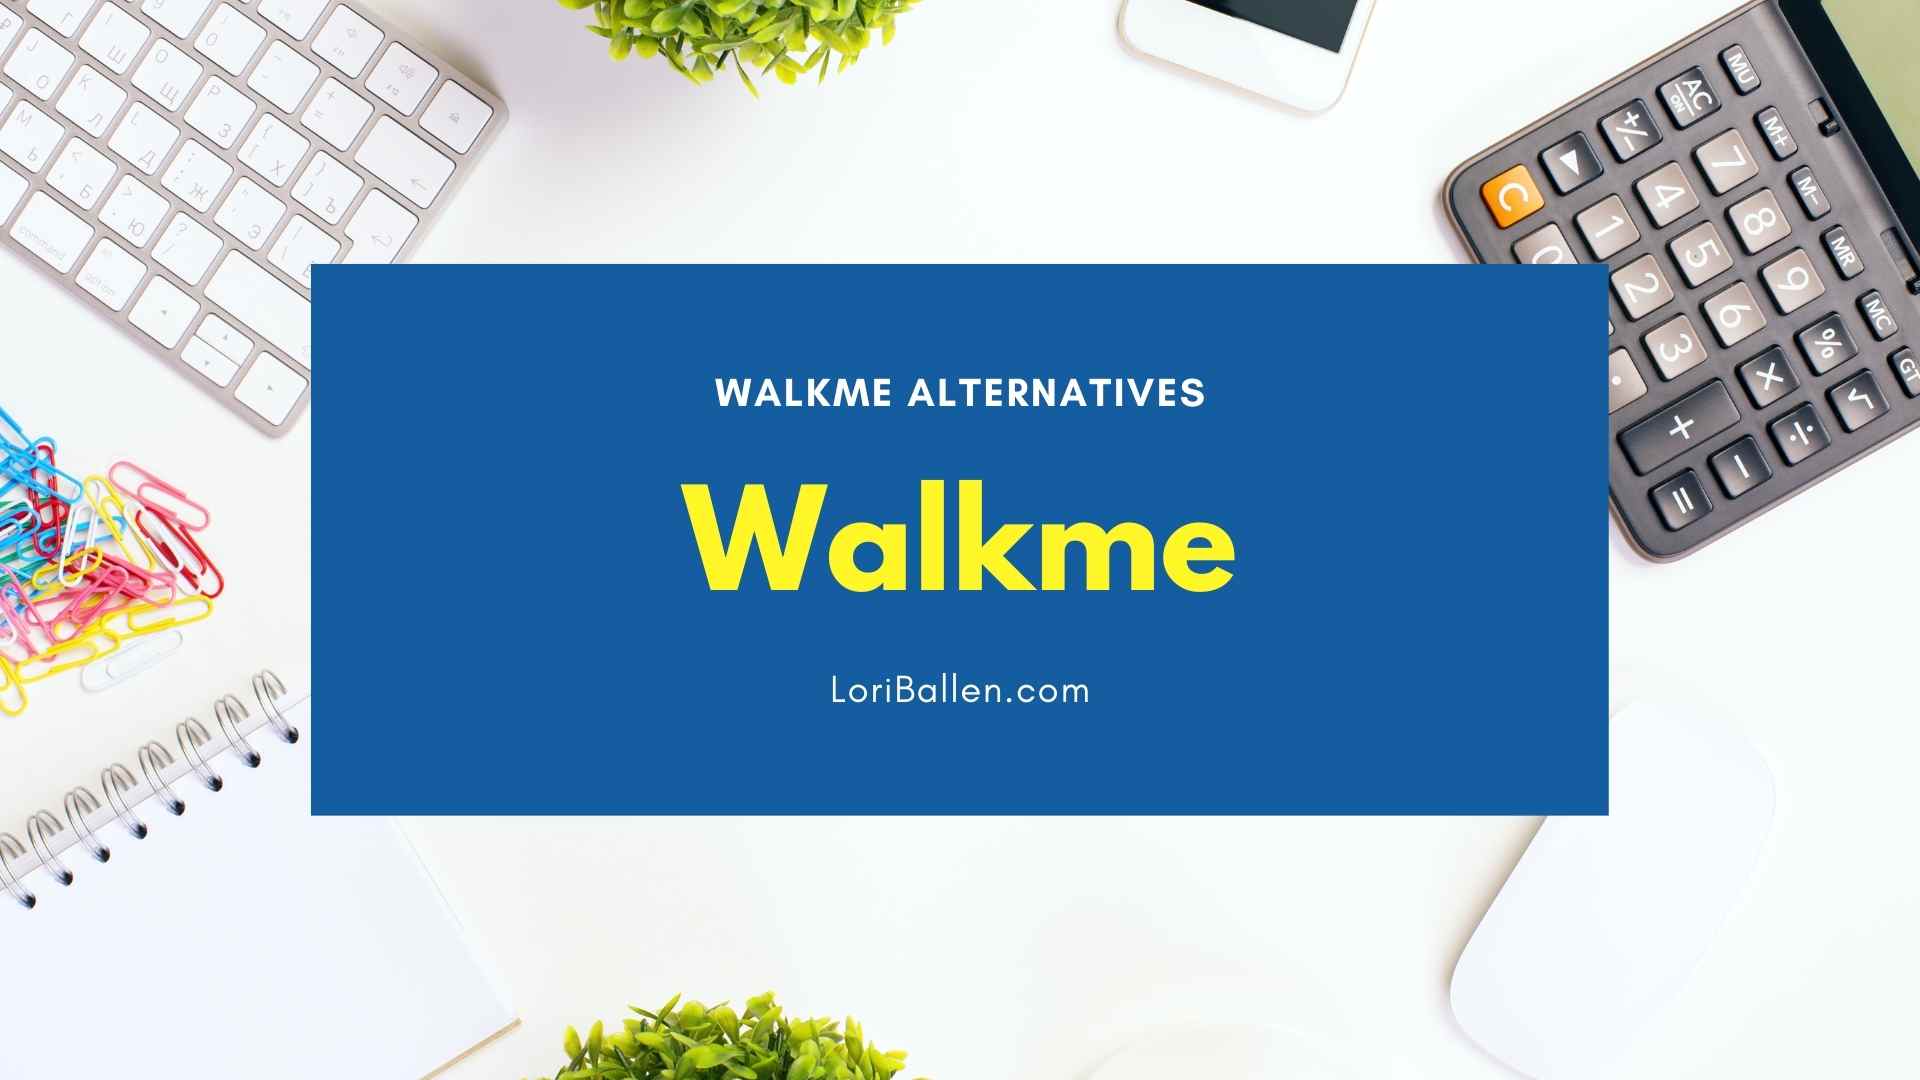 Don't worry – there are plenty of WalkMe alternatives that can help you improve your website's usability.